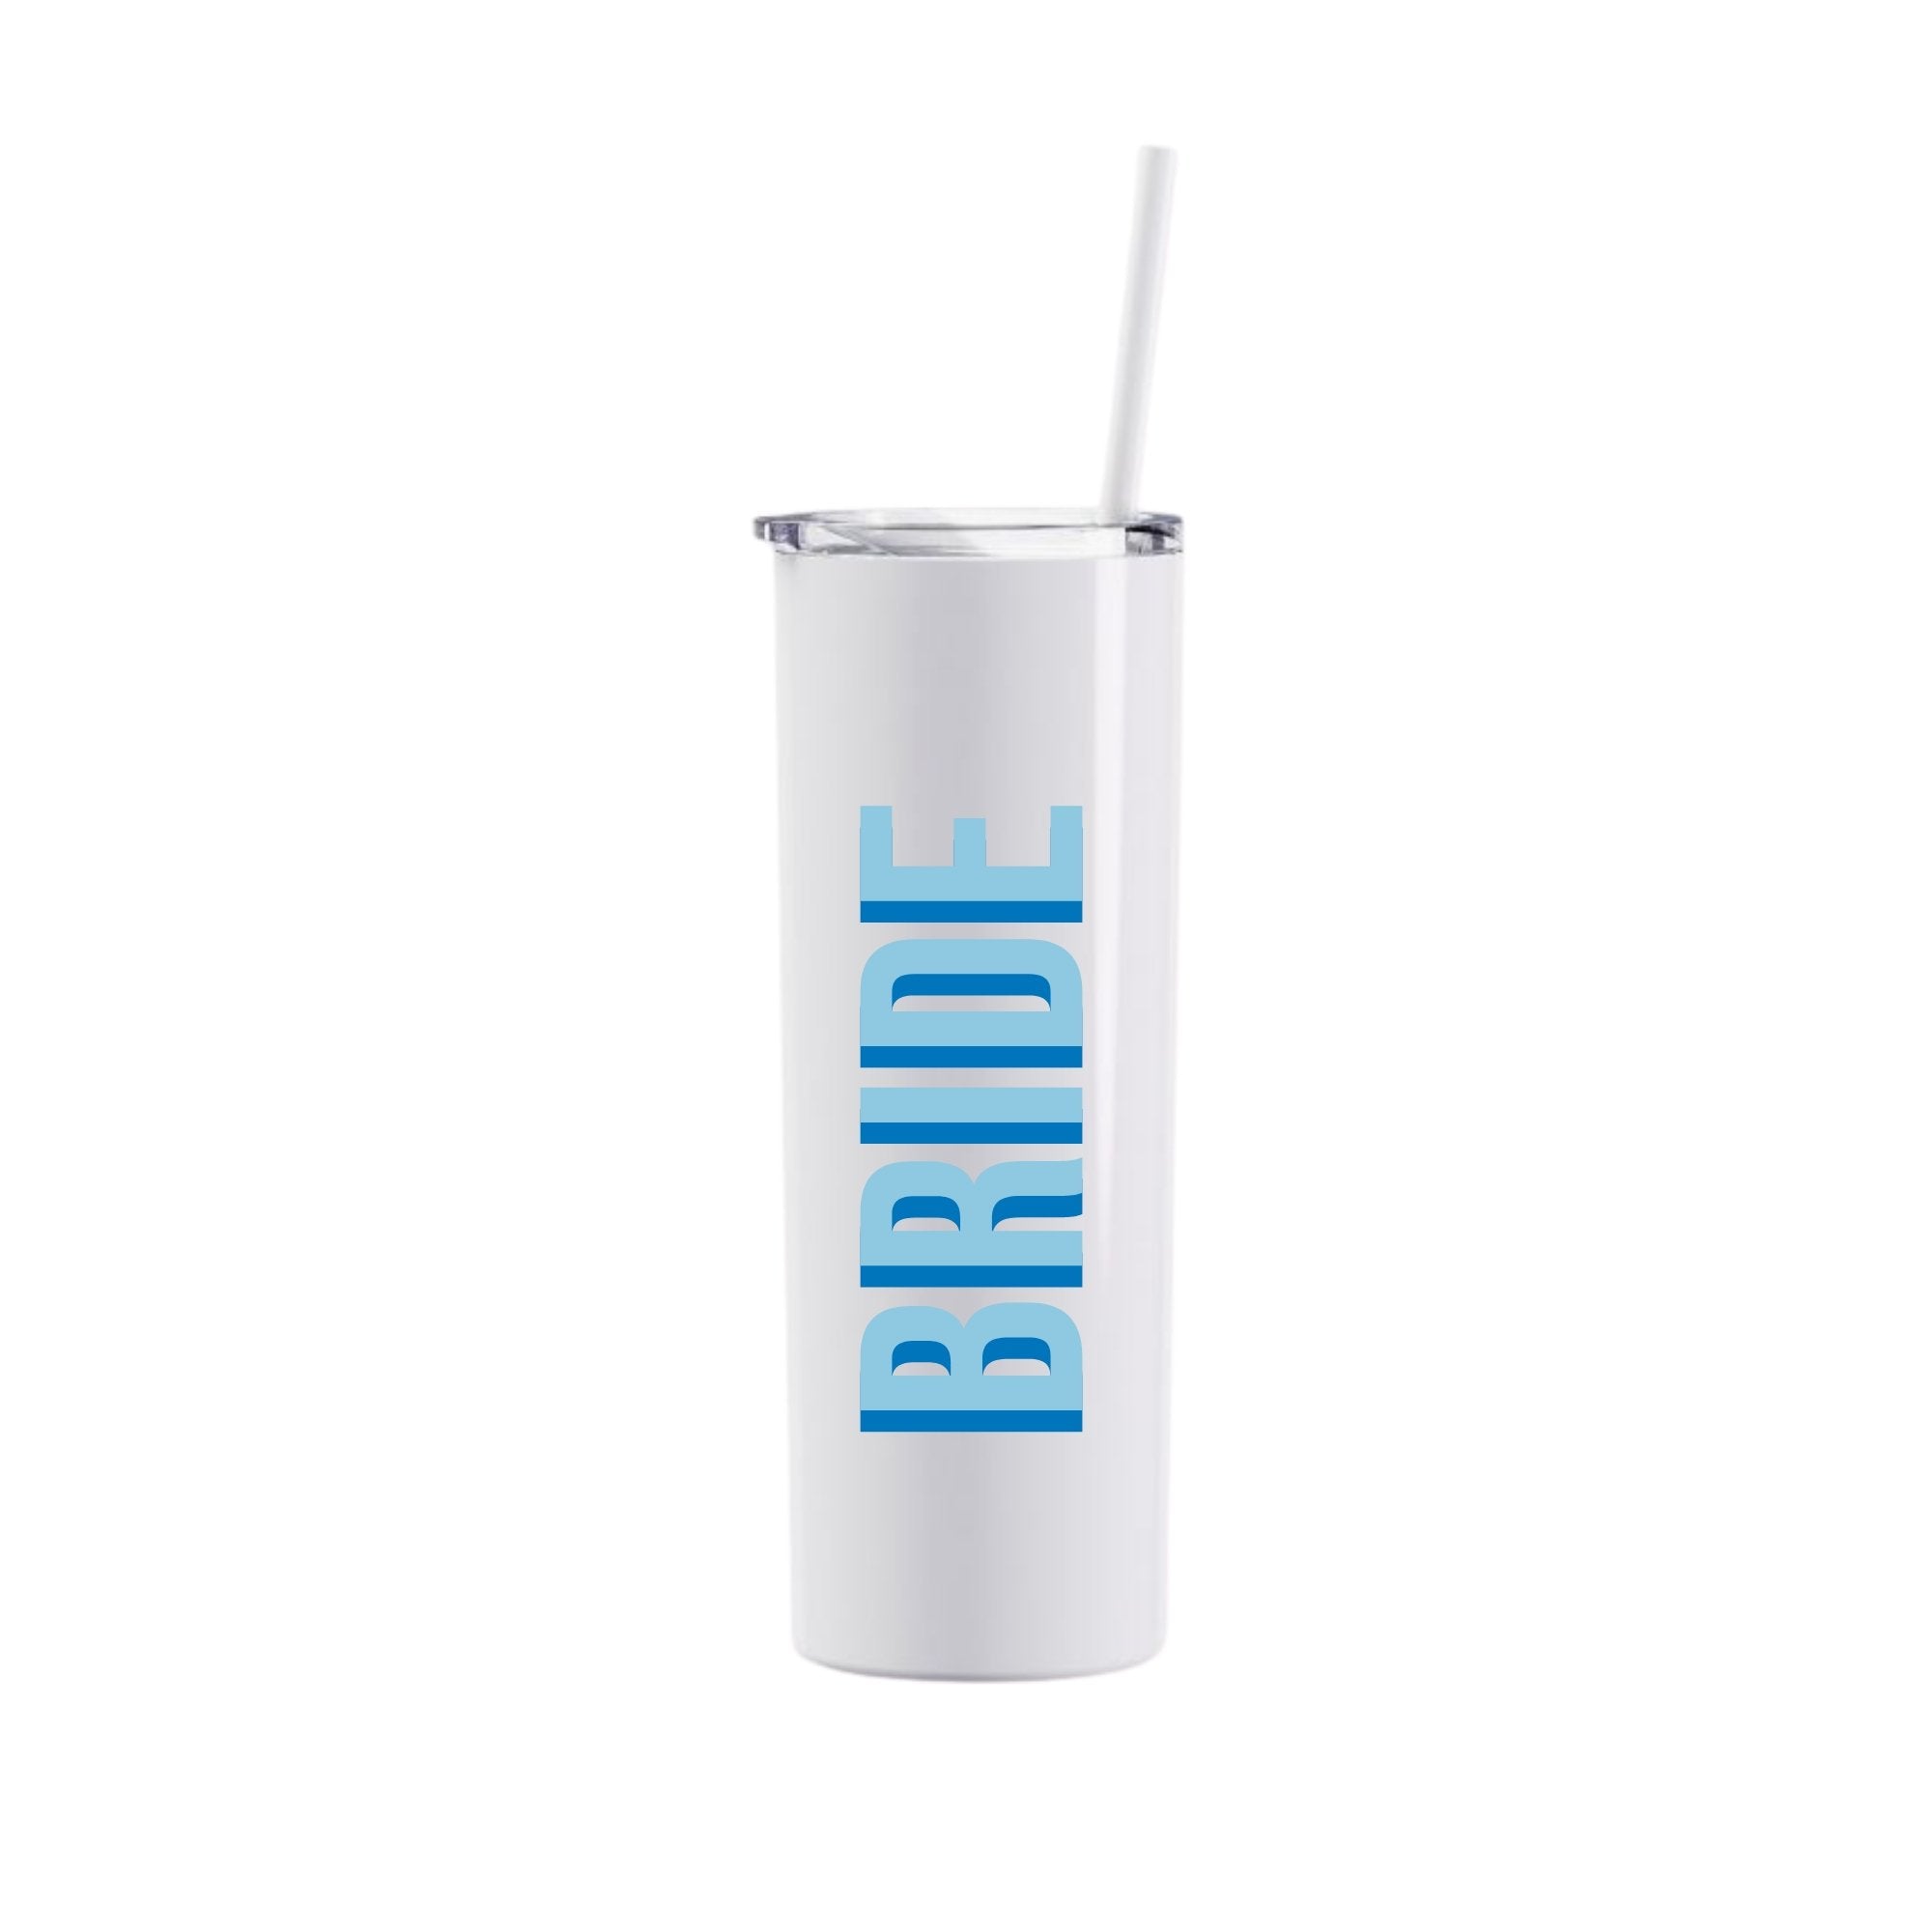 A white tumbler is customized with blue text that says "Bride"